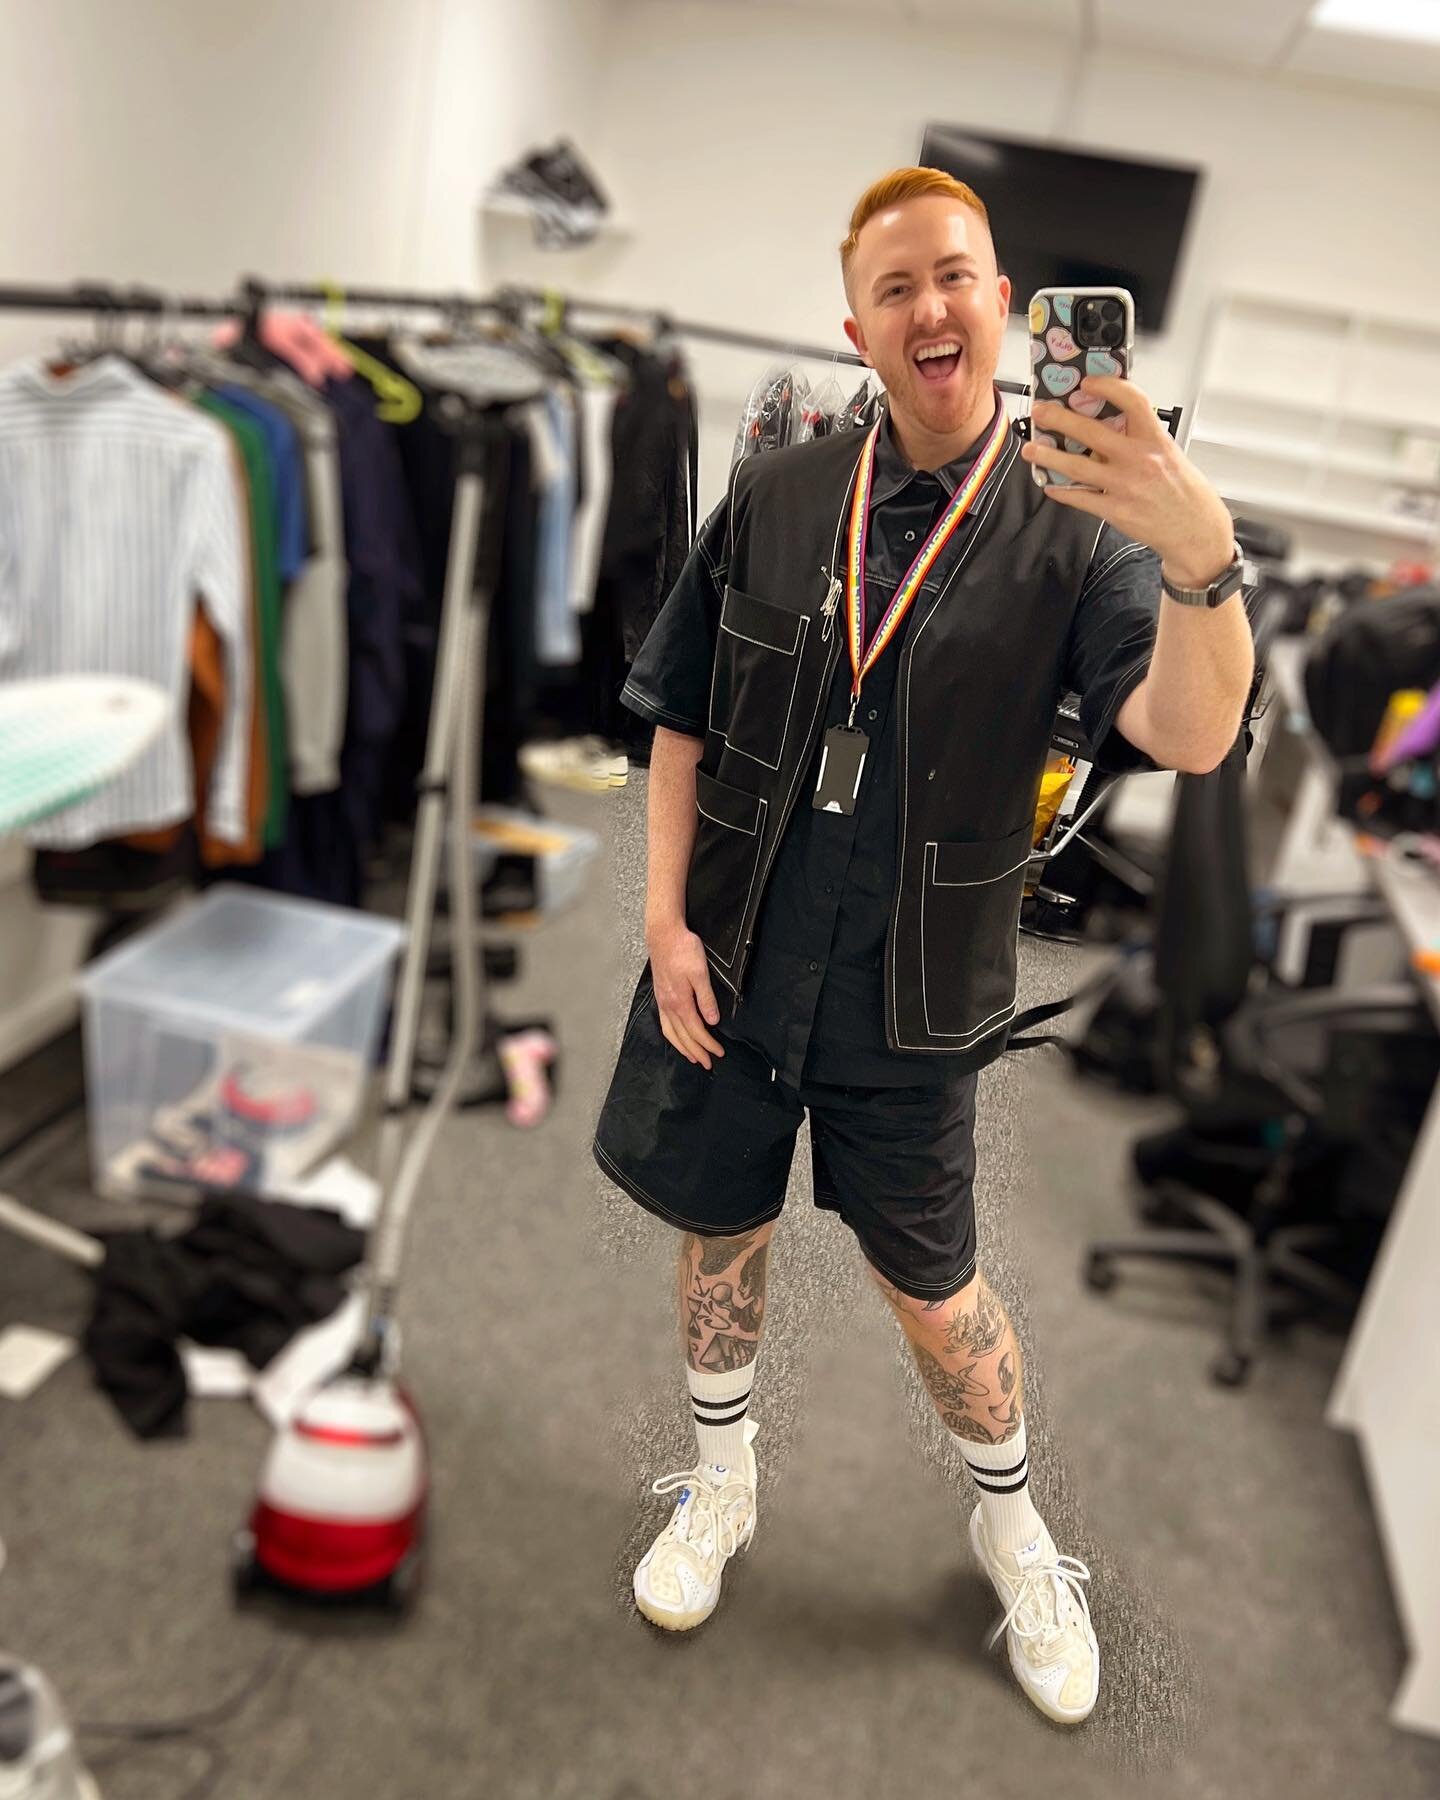 #outfitoftheday - Serving you Gothic fisherman vibes in studio today. Ahoy there me hearties! 🎬🎣🖤🐟💀
&bull;
&bull;
&bull;#mensfashion #styleinspo #onset #menstyle #instagay #goth